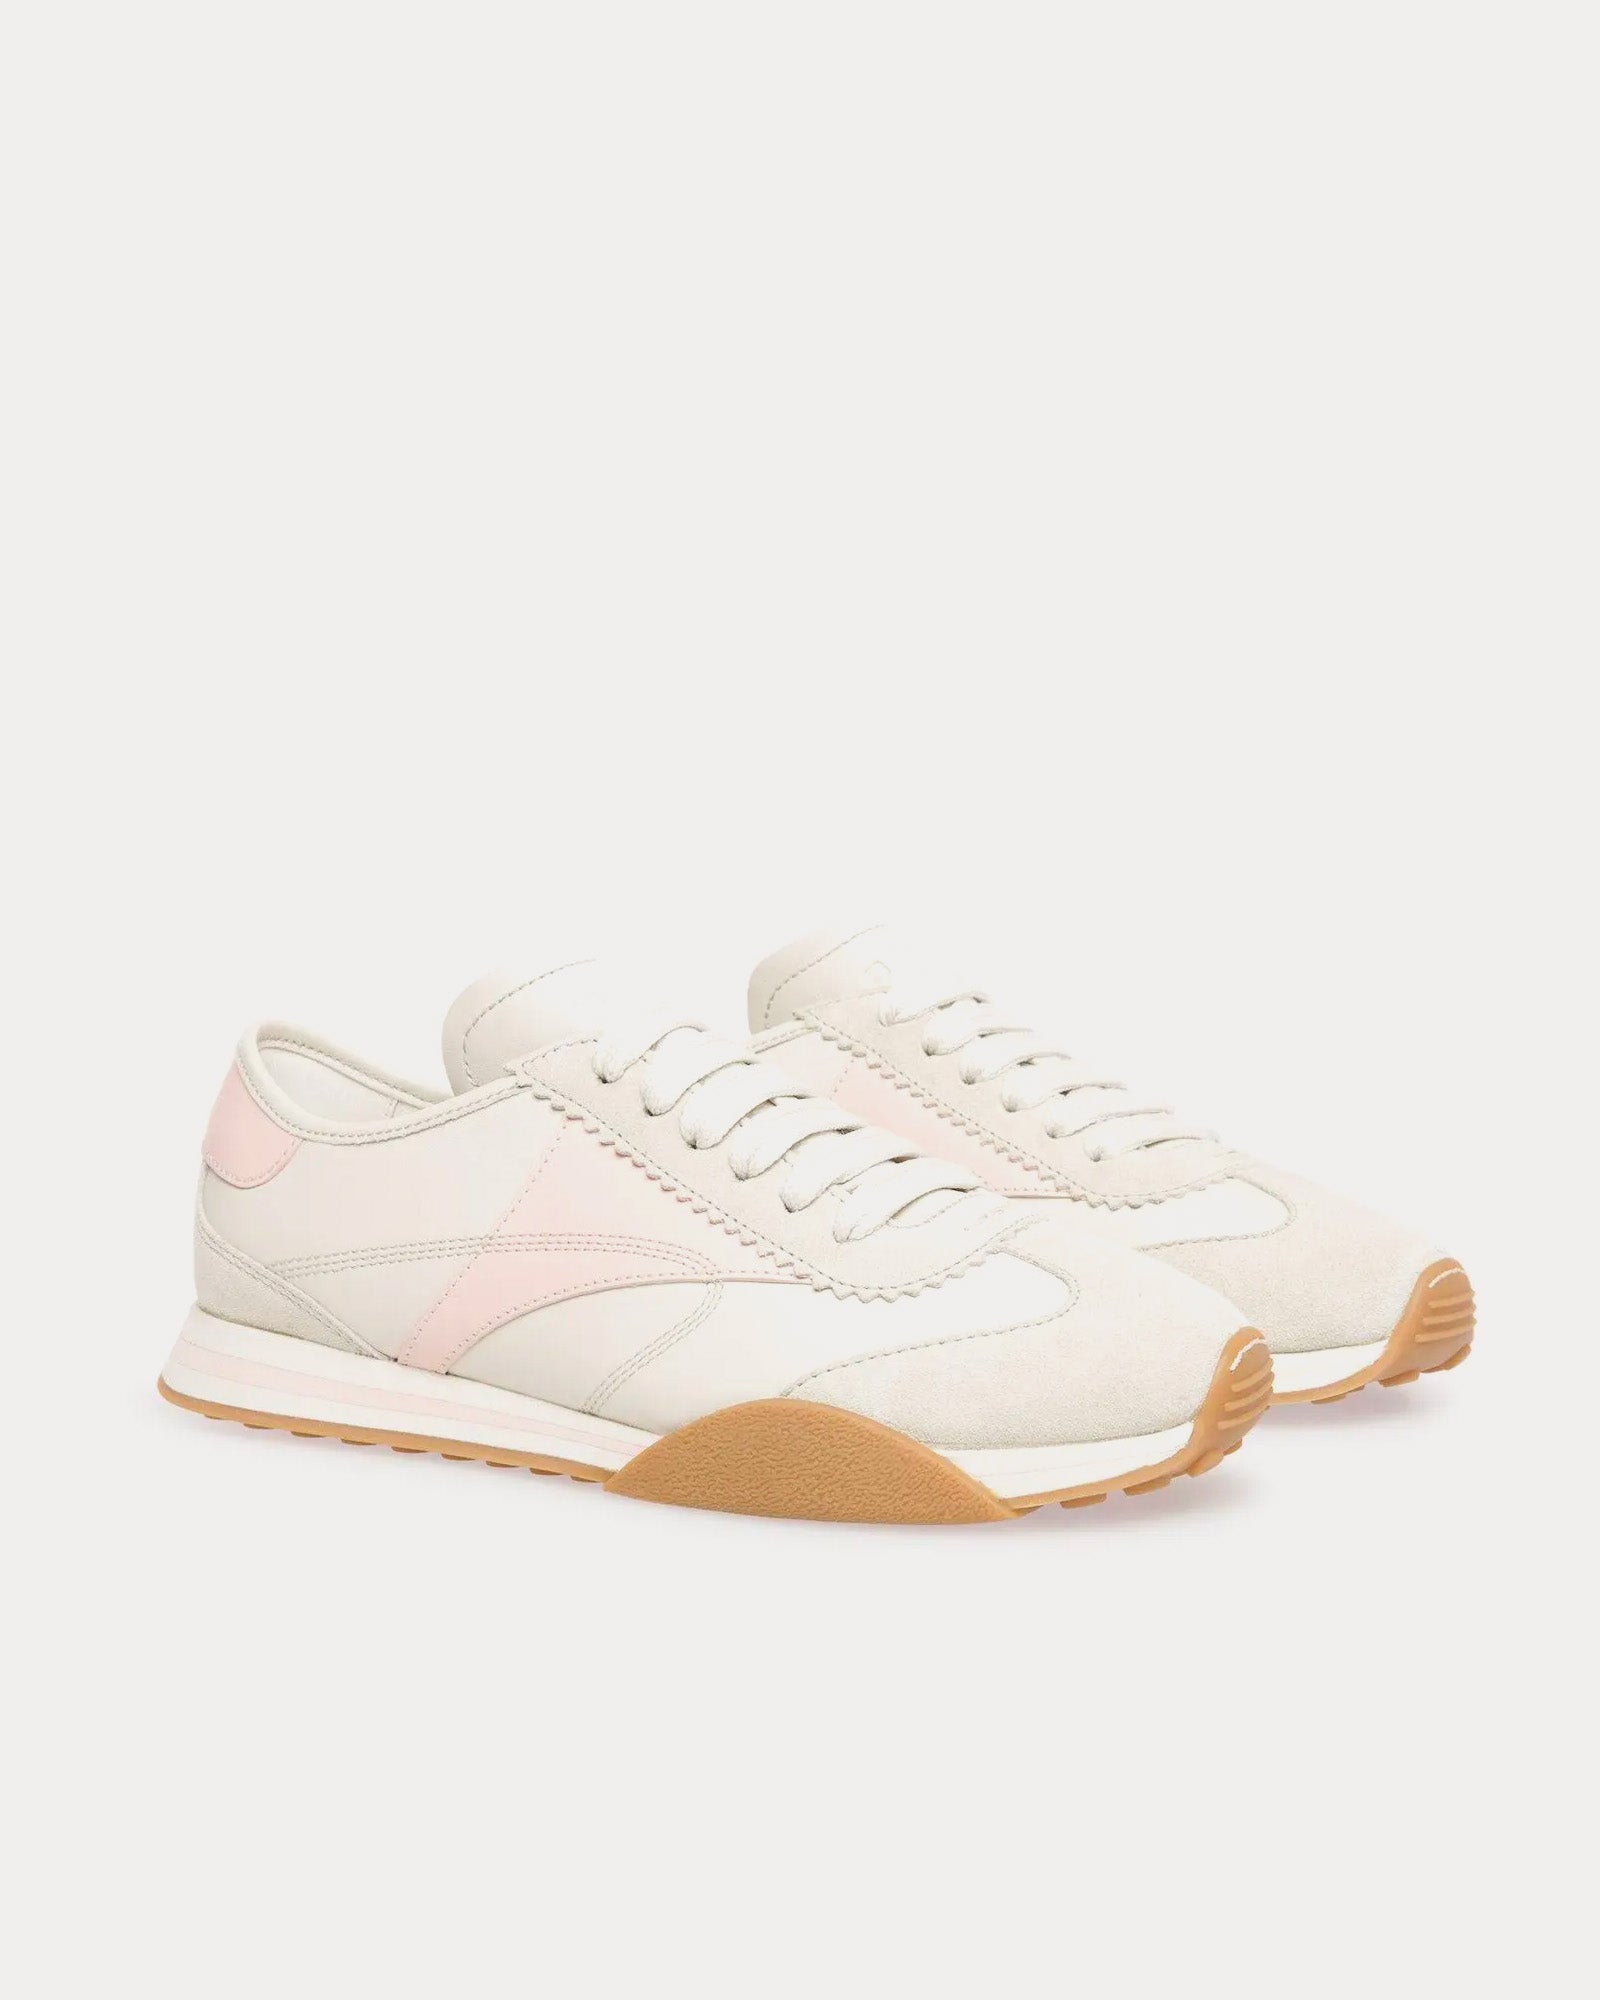 Bally - Sussex Leather Dusty White / Rose Low Top Sneakers